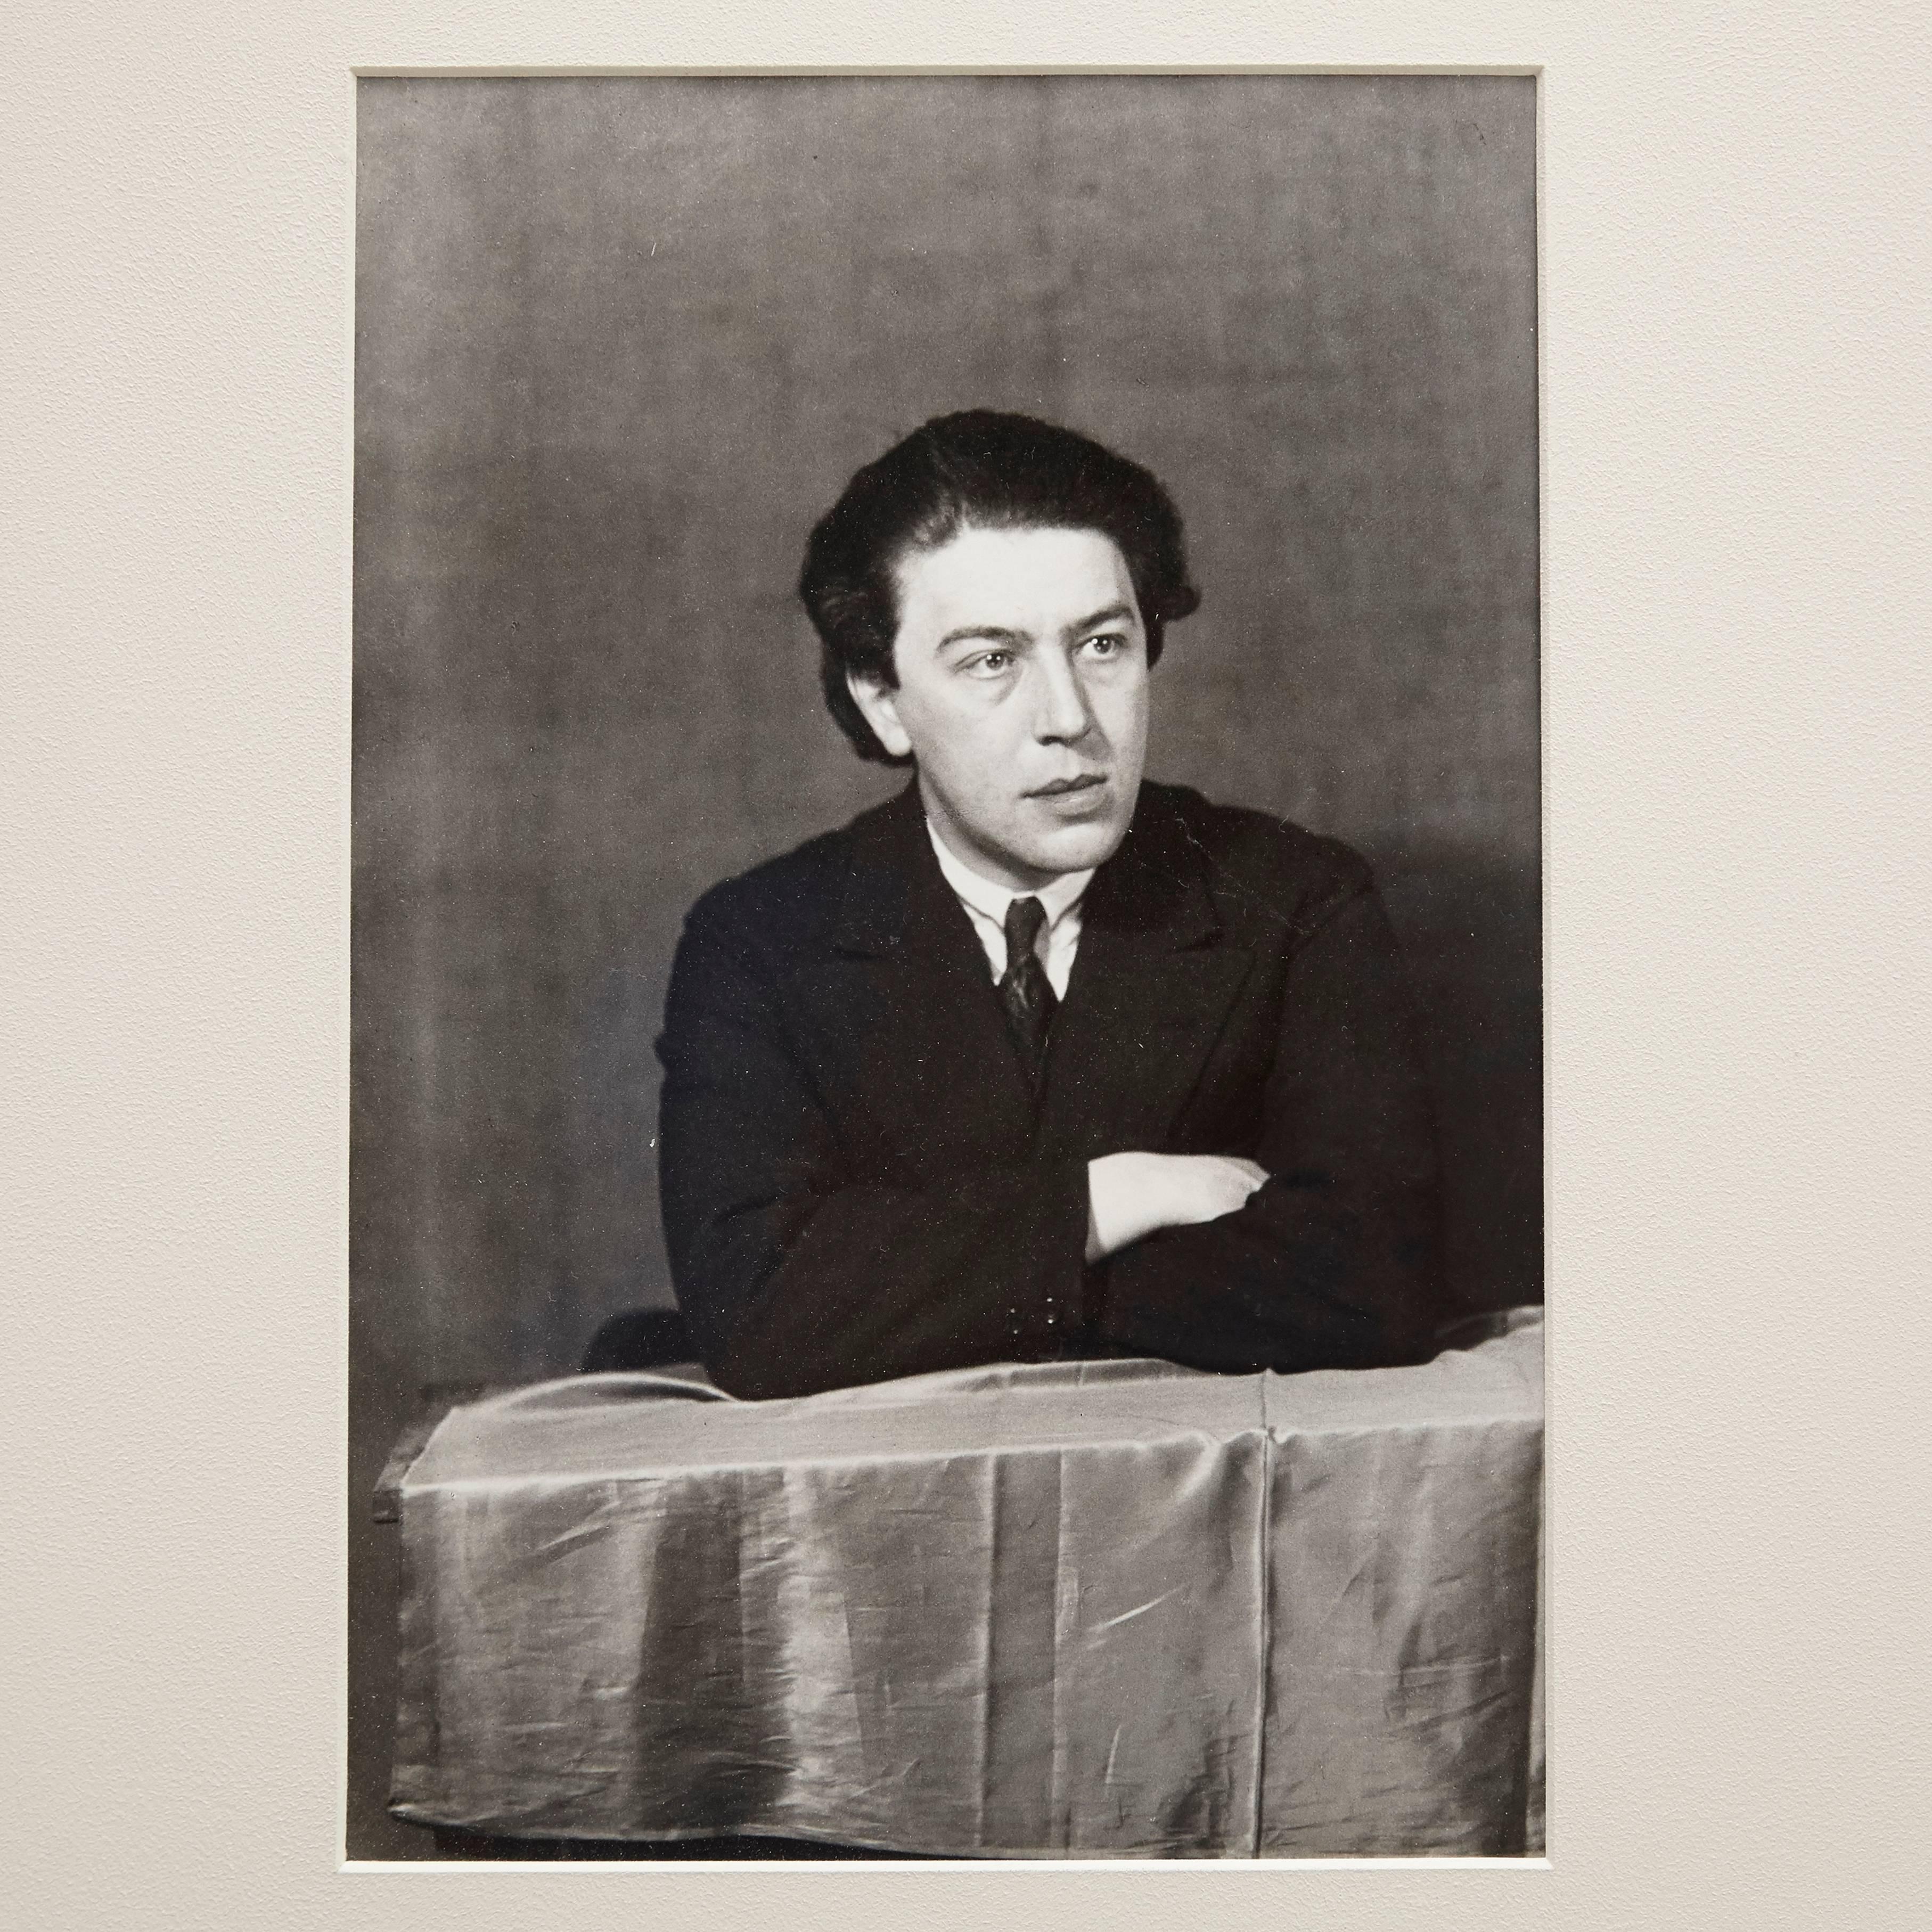 Portrait of André Breton photographed by Man Ray, 1932.

A posthumous print from the original negative in 1977 by Pierre Gassmann.

Gelatin silver bromide.

Born (Philadelphia, 1890 - Paris, 1976) Emmanuel Radnitzky, Man Ray adopted his